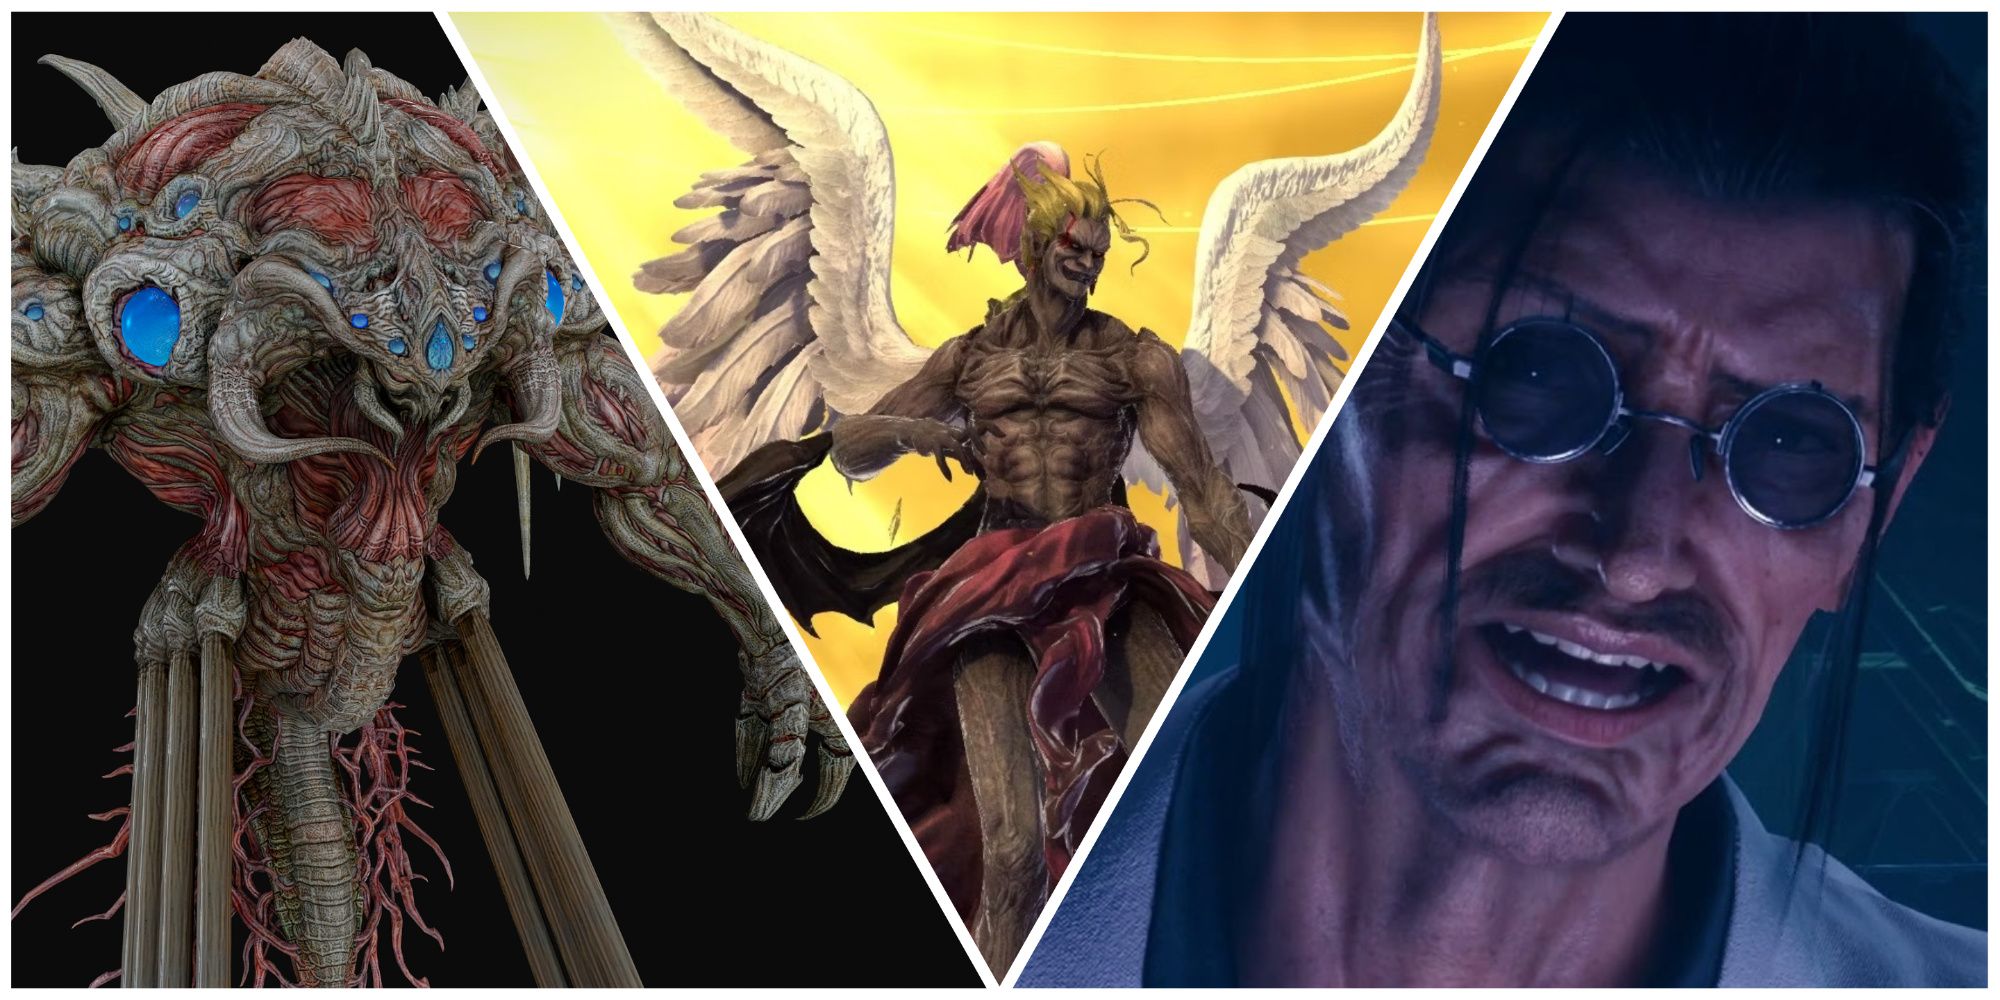 chaotic evil final fantasy characters